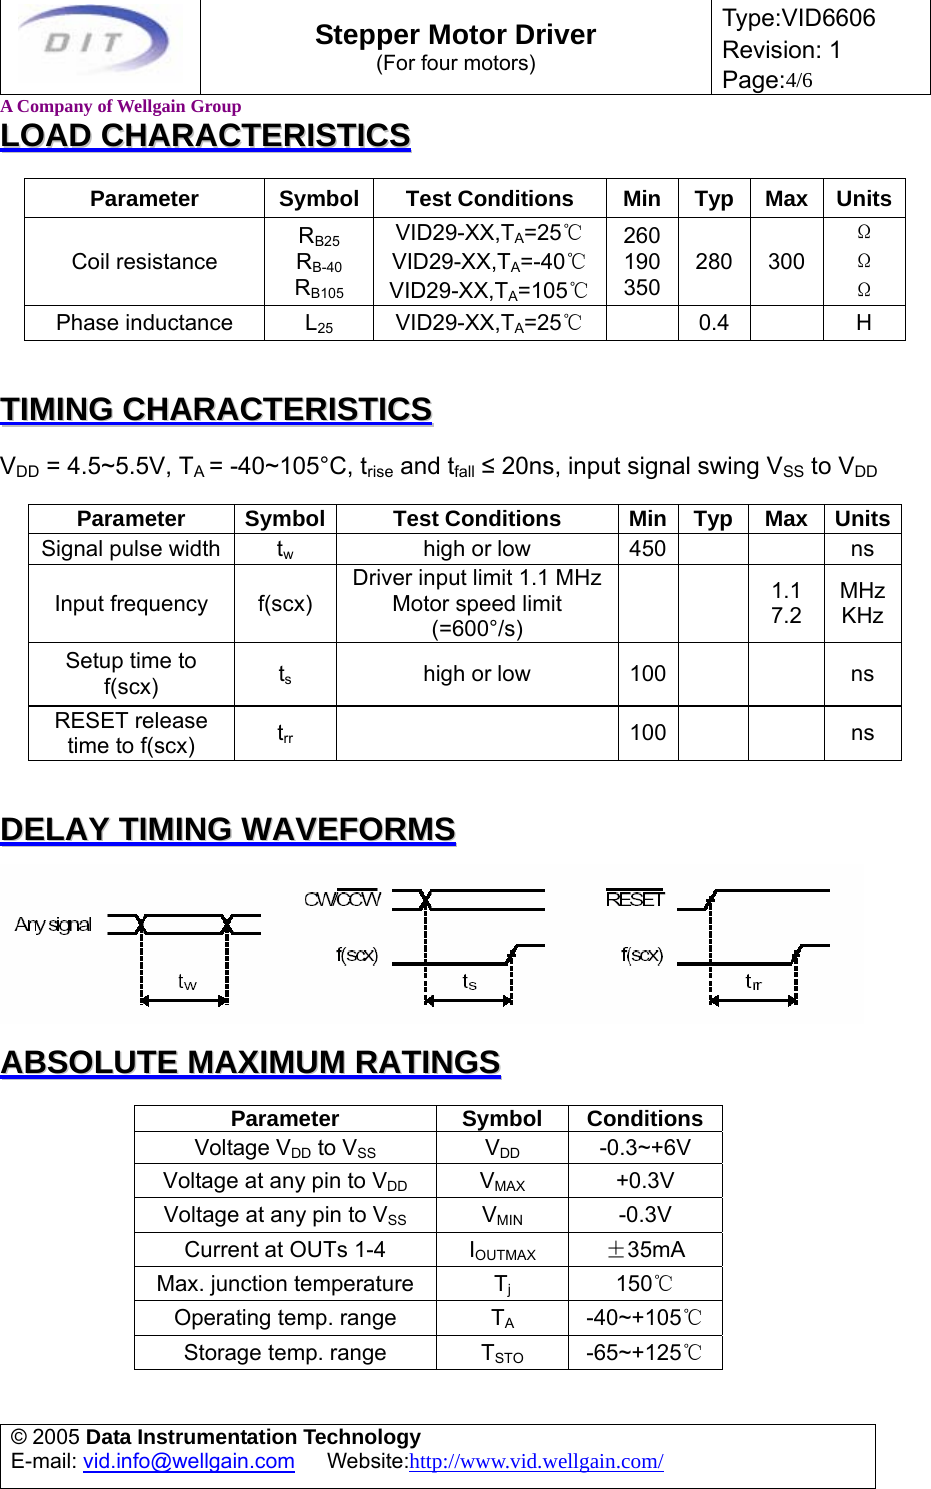 Page 4 of 6 - VID6606 Manual 060809 Stepper Motor Driver